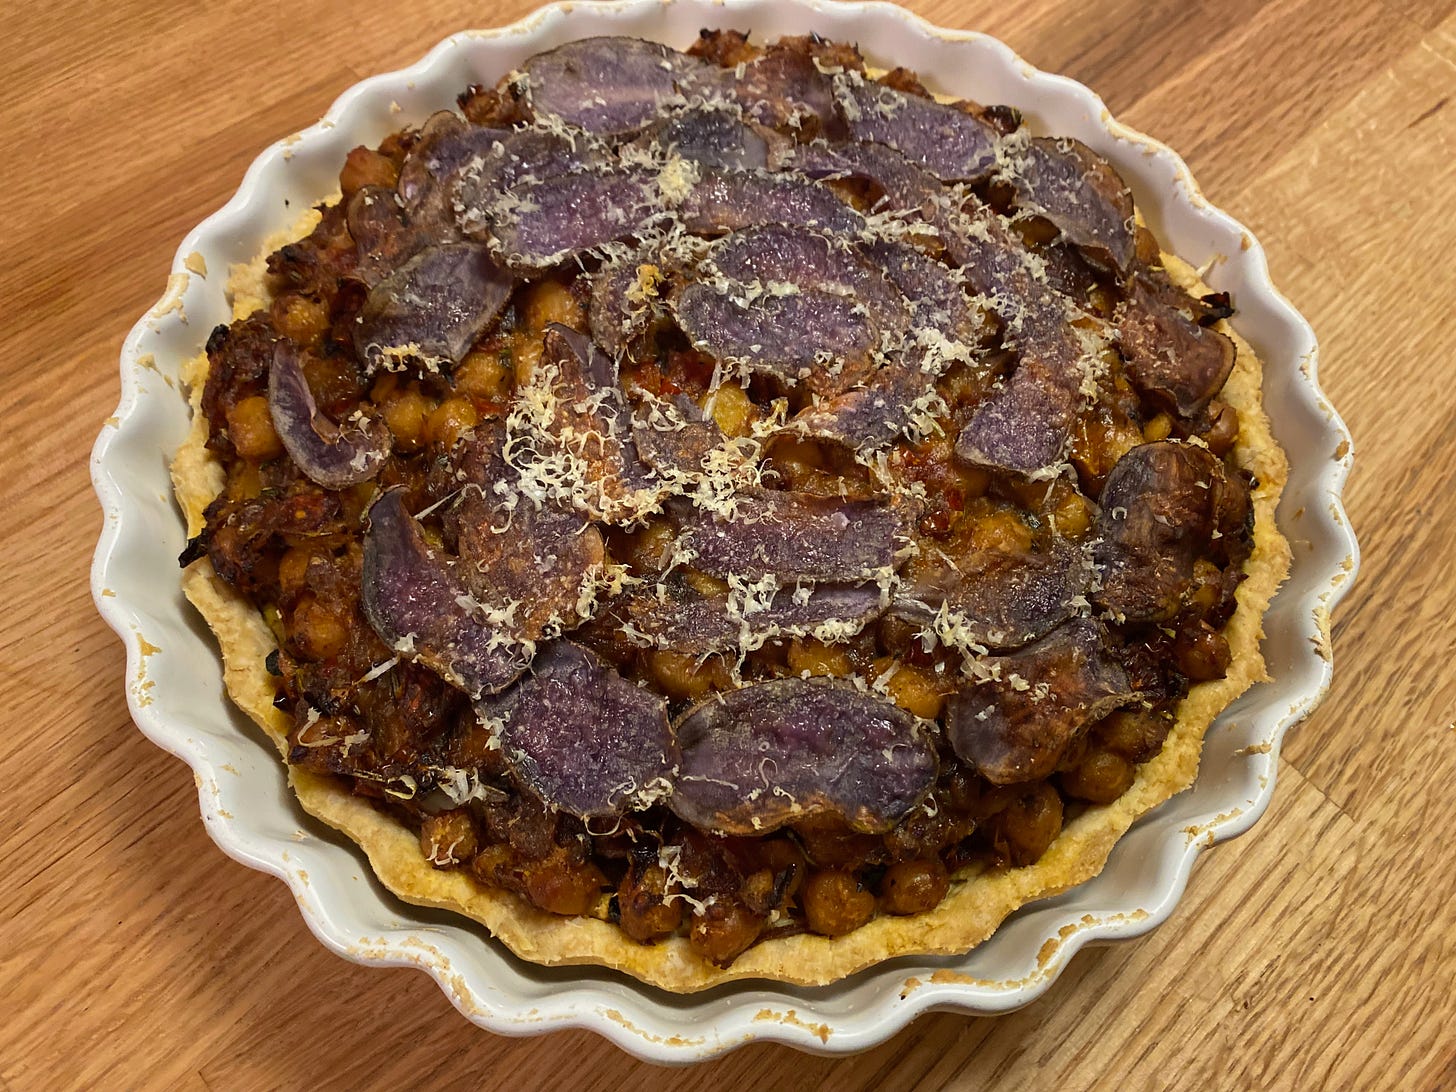 A round tart in a white fluted ceramic tart pan sits on wooden counter. The top of the tart is covered in thinly sliced purple potatoes and grated Parmesan. The chickpea filling is visible underneath the potato layer.